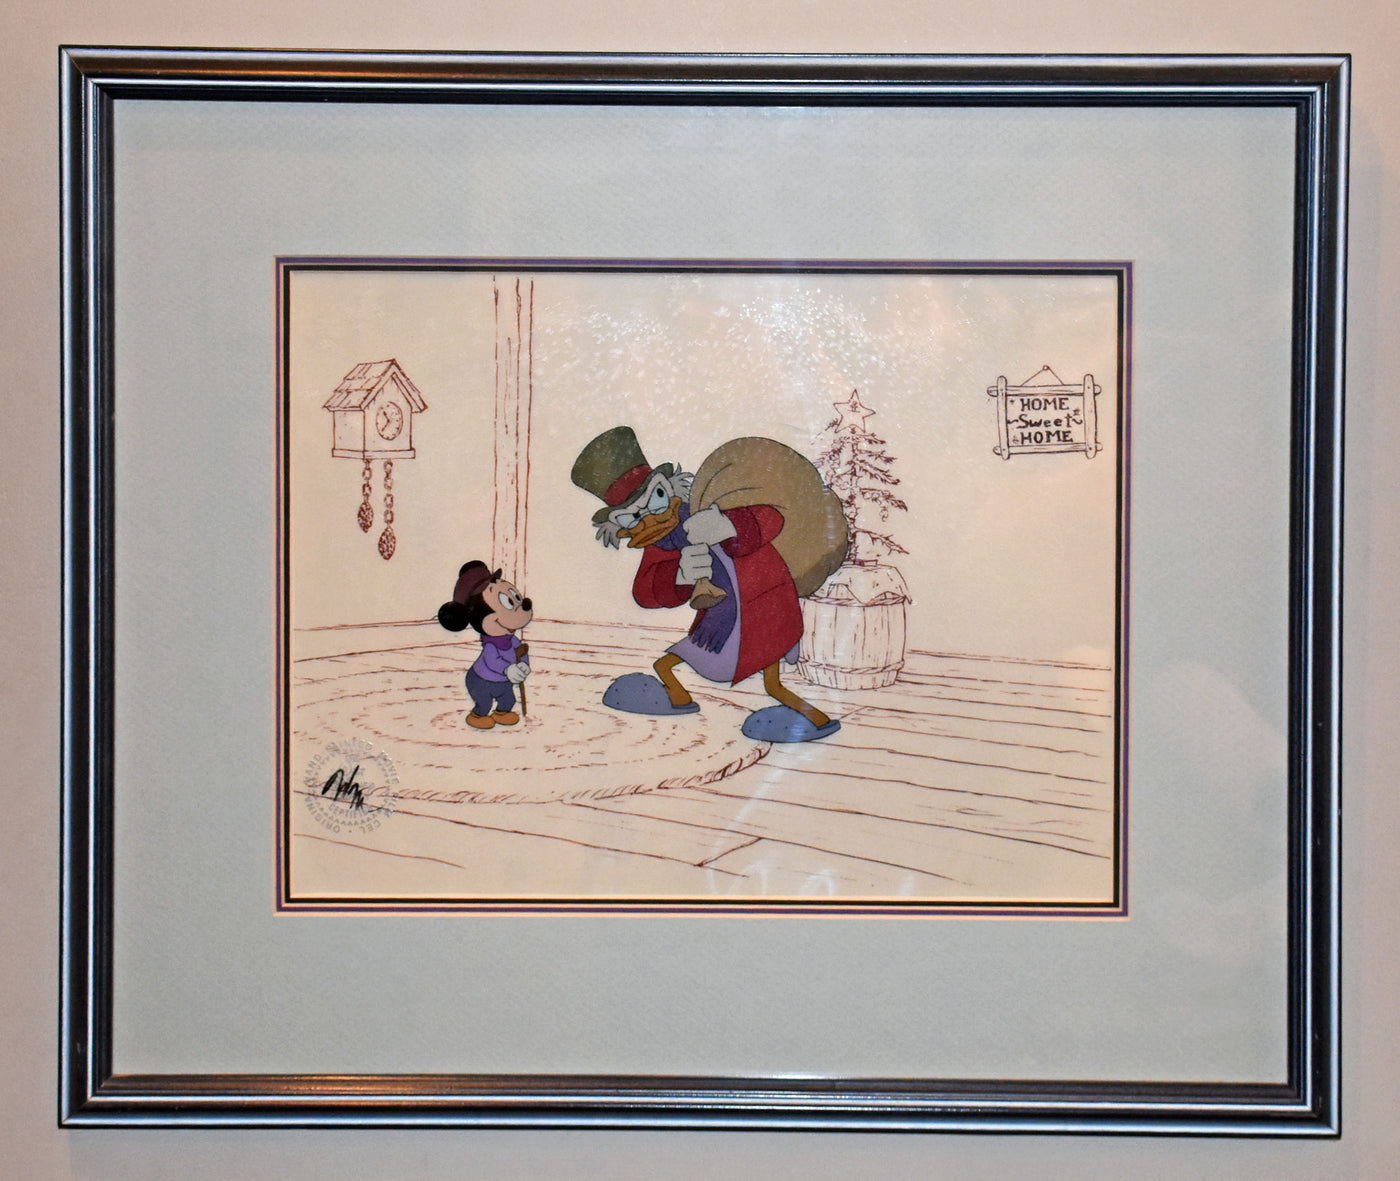 Original Walt Disney Production Cel from Mickey's Christmas Carol featuring Scrooge McDuck and Tiny Tim